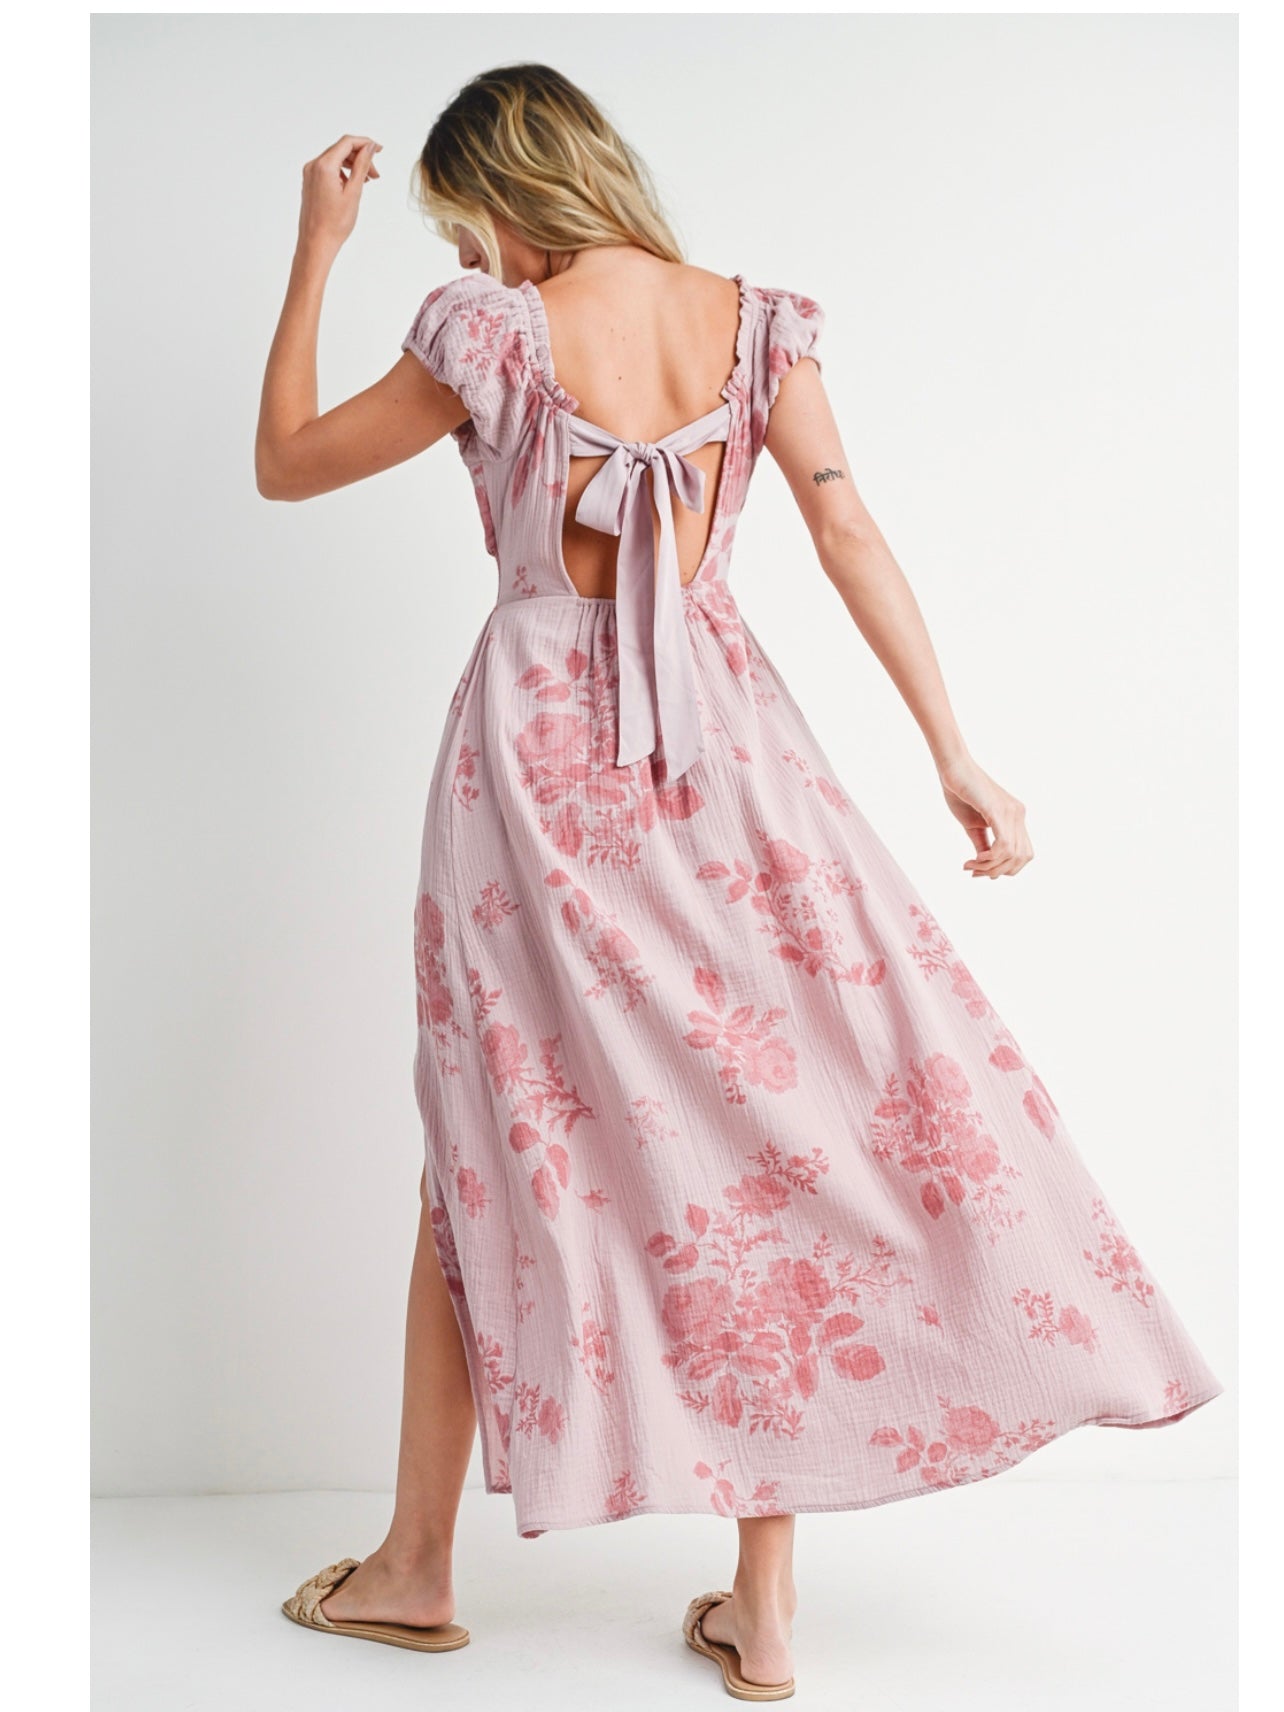 Floral Print Babydoll Maxi Dress in Dusty Pink